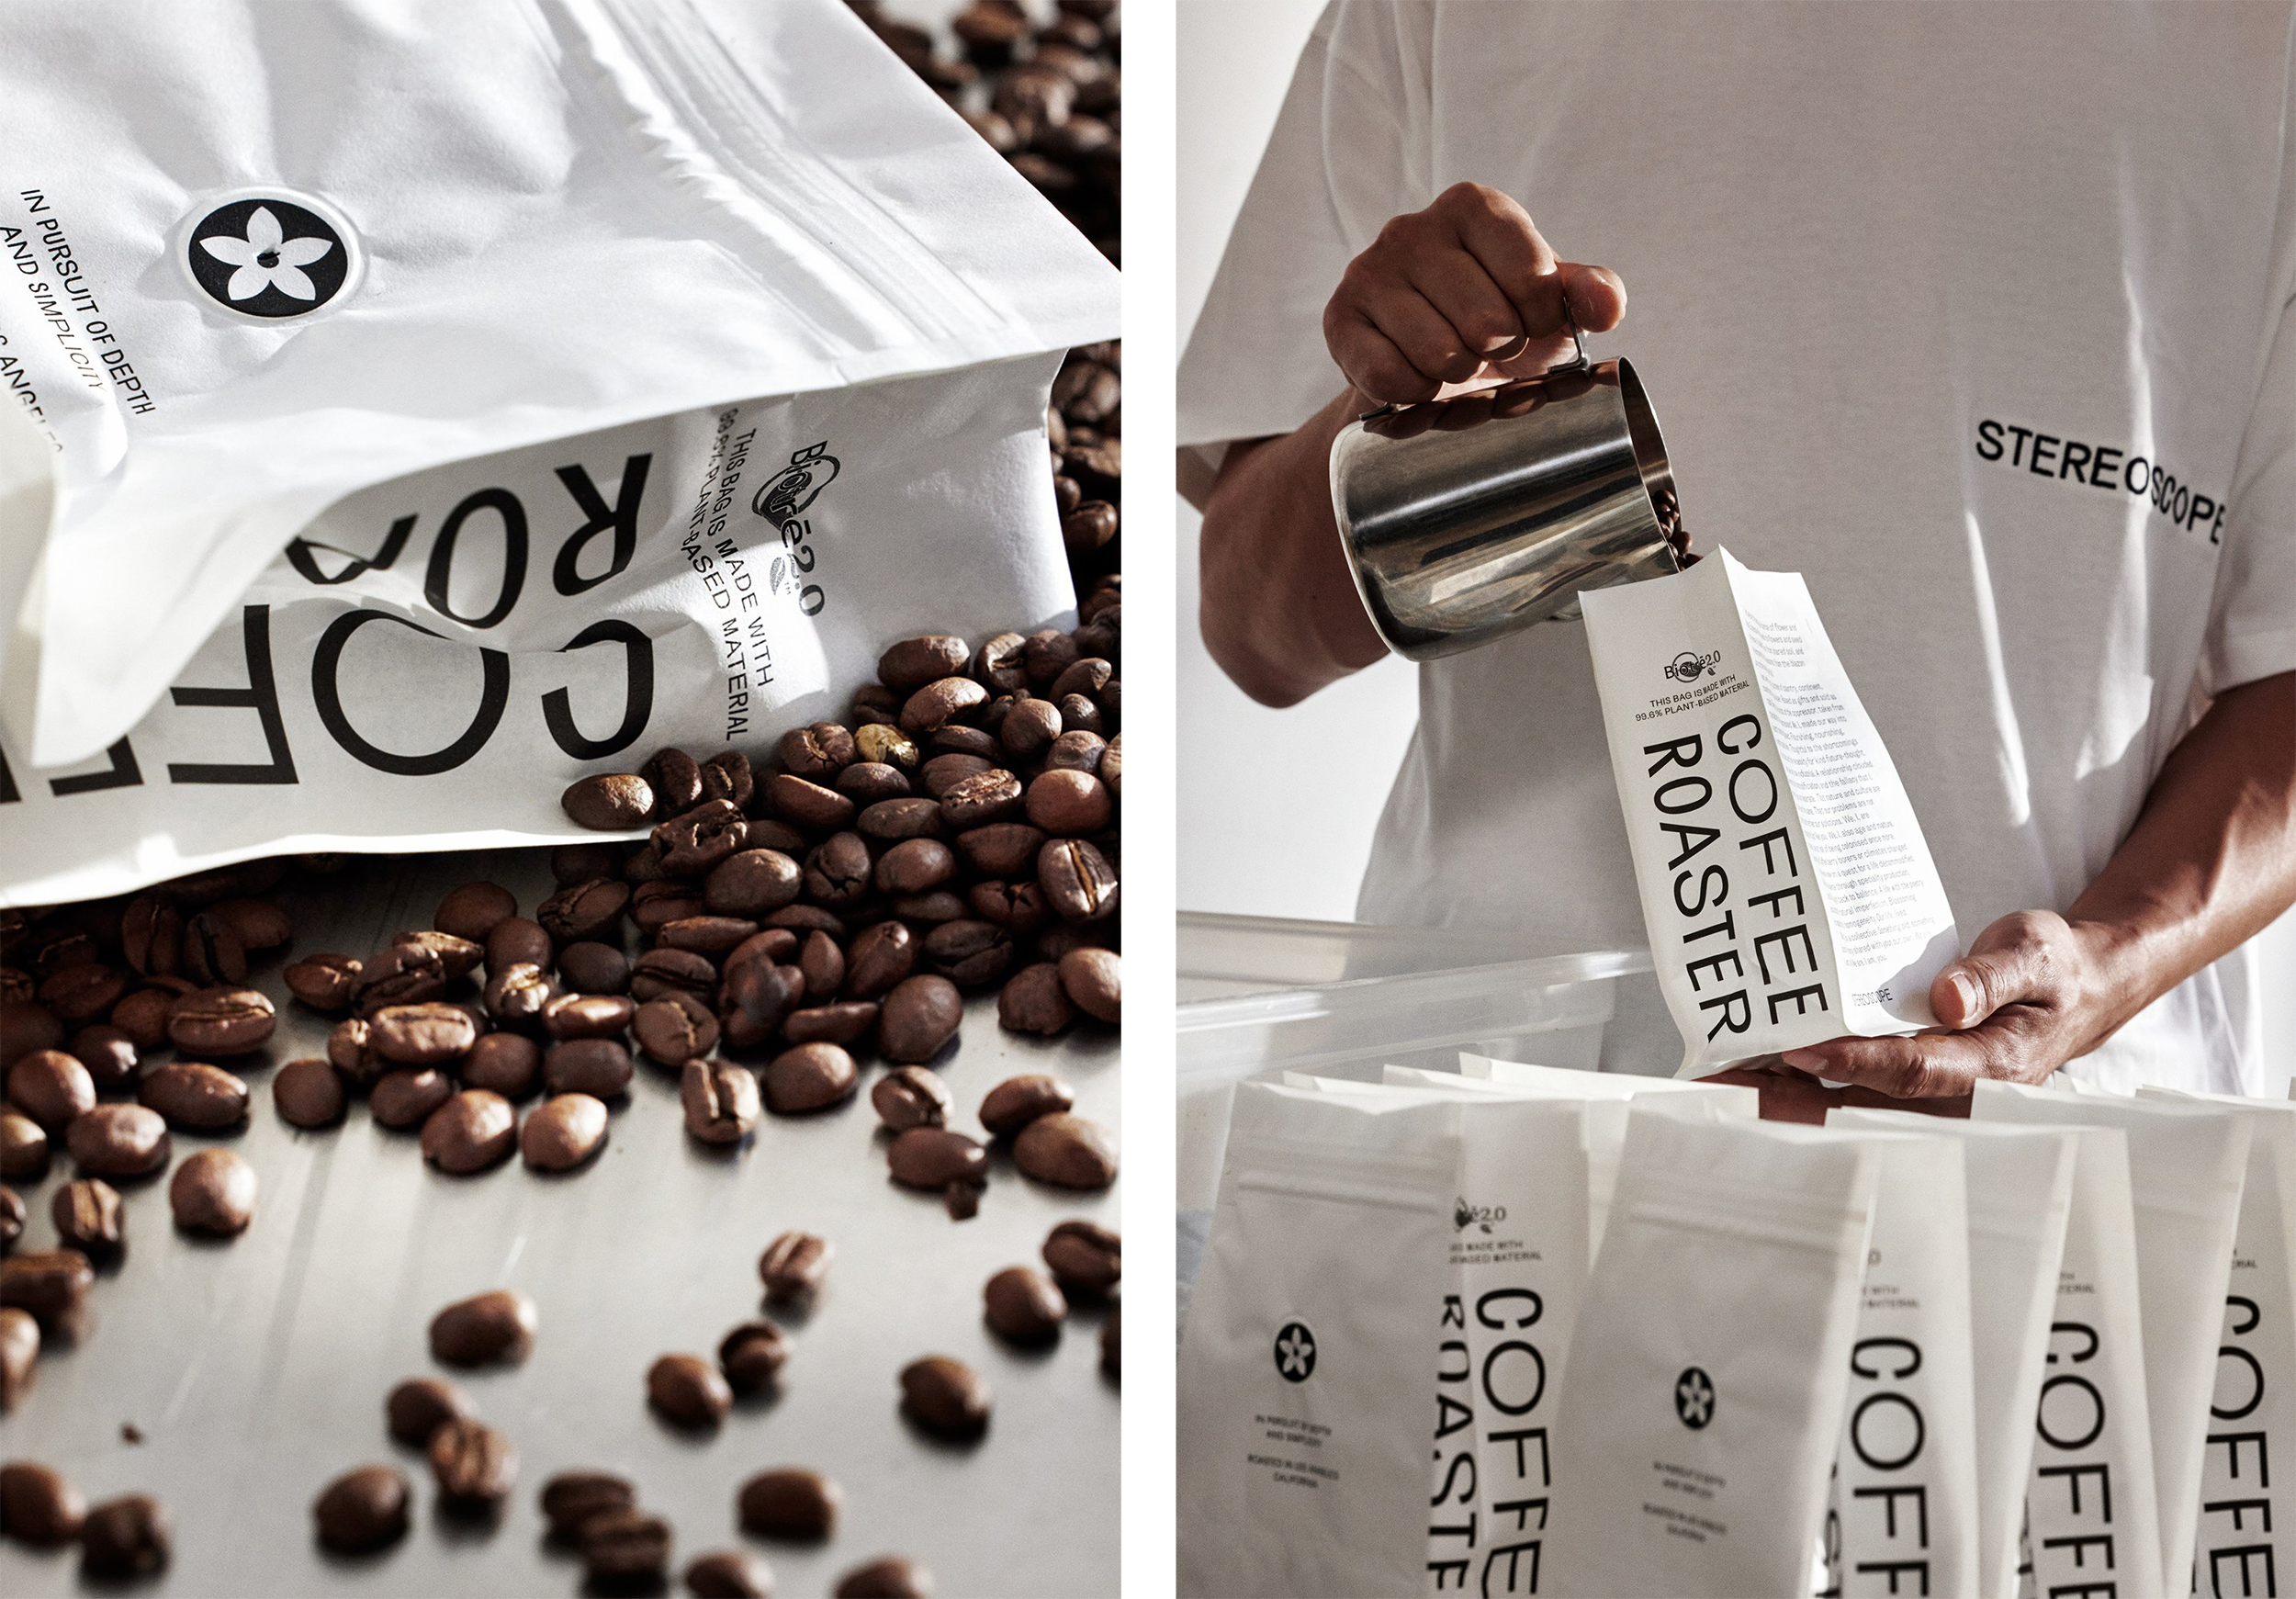 New brand identity and custom packaging design by Olssøn Barbieri for speciality coffee copmany Stereoscope